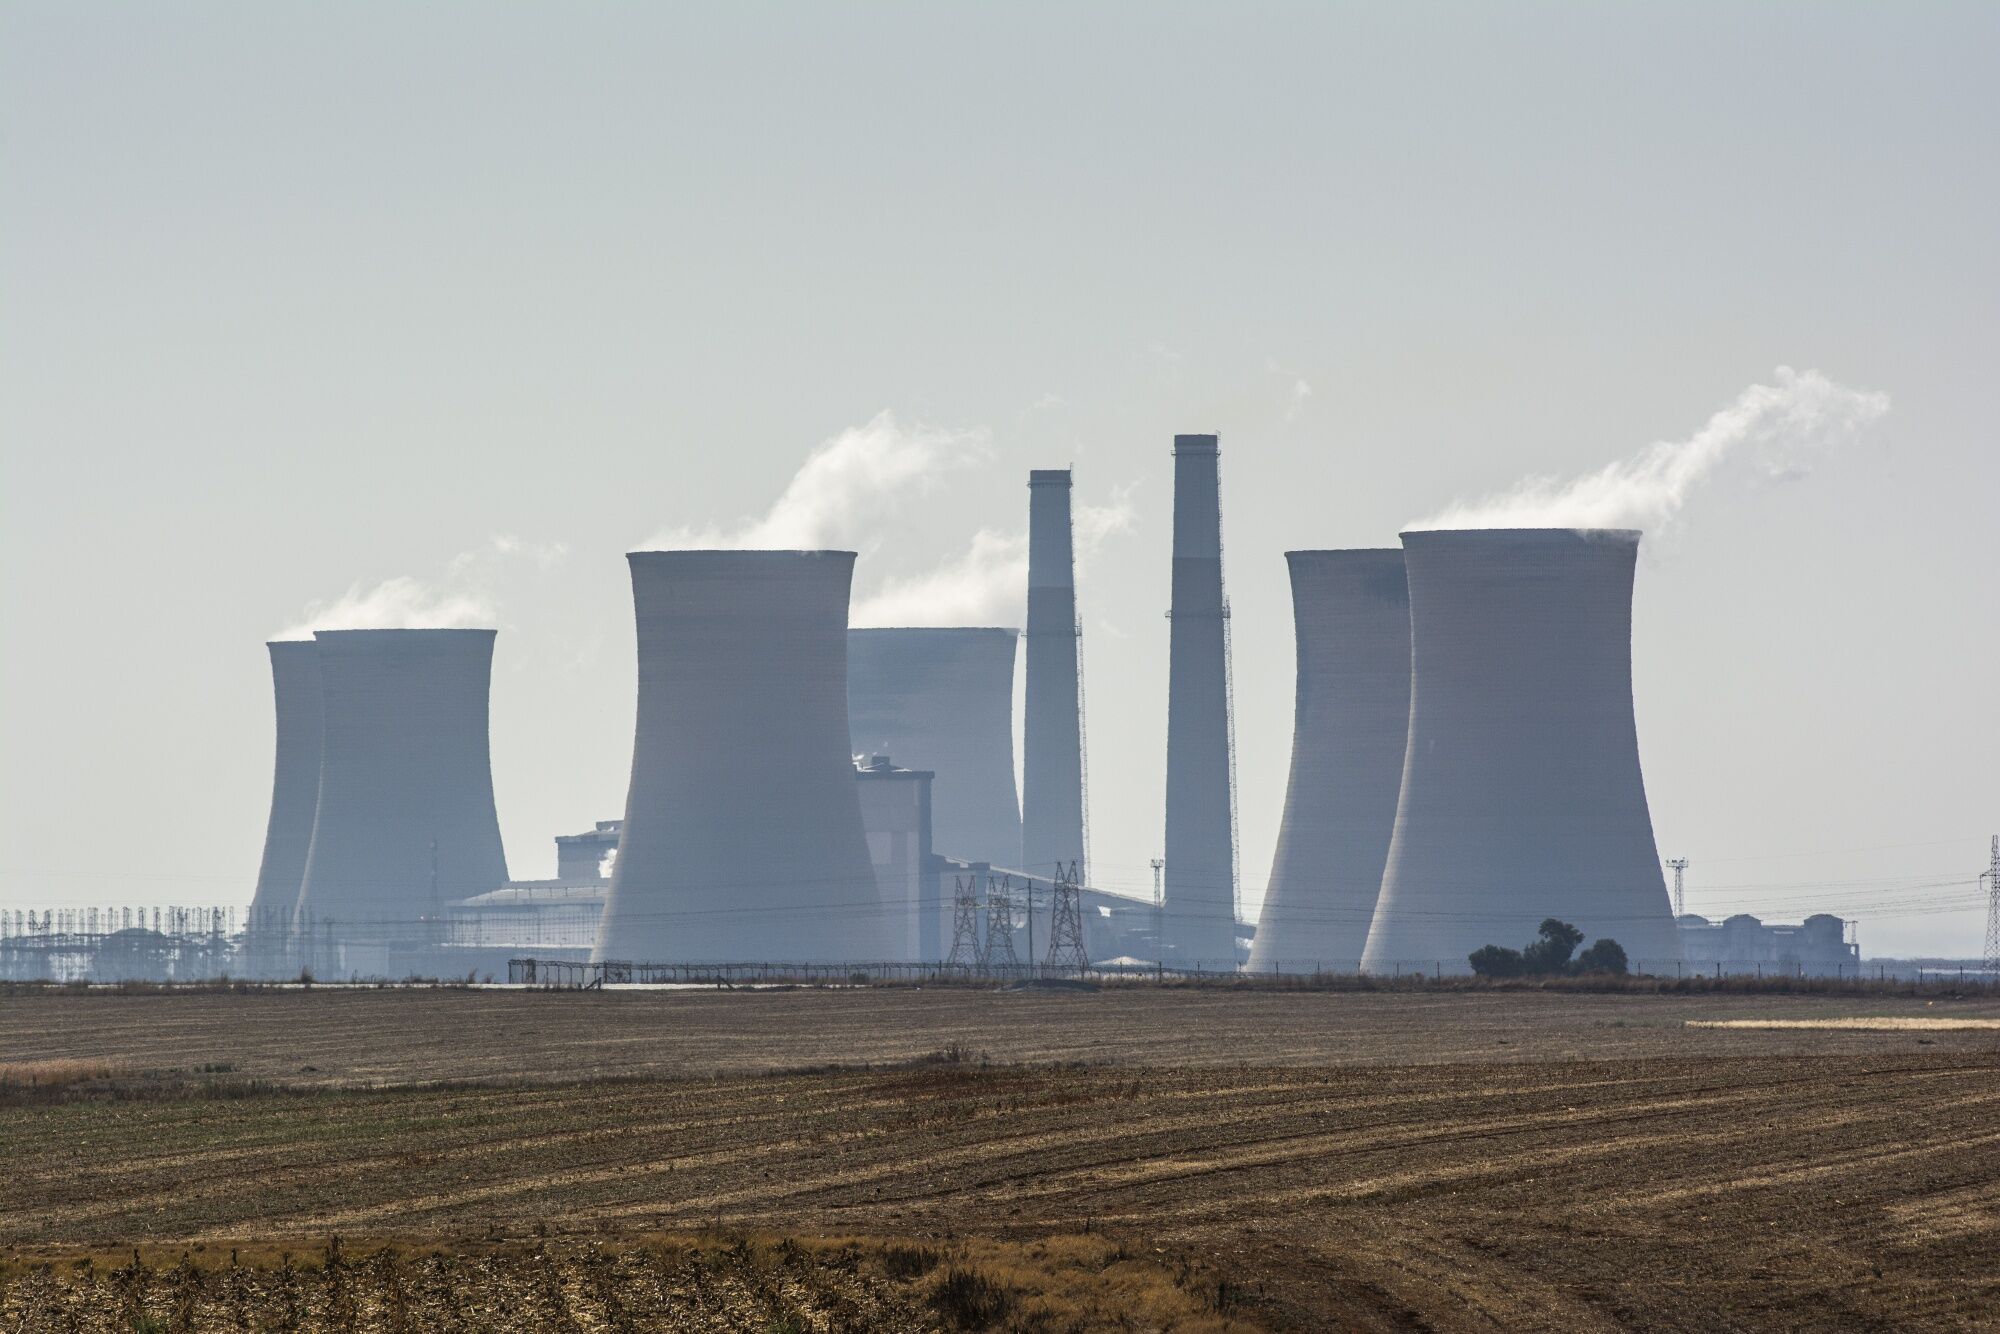 south africa moots new coal-plant closure to secure $2.6 billion